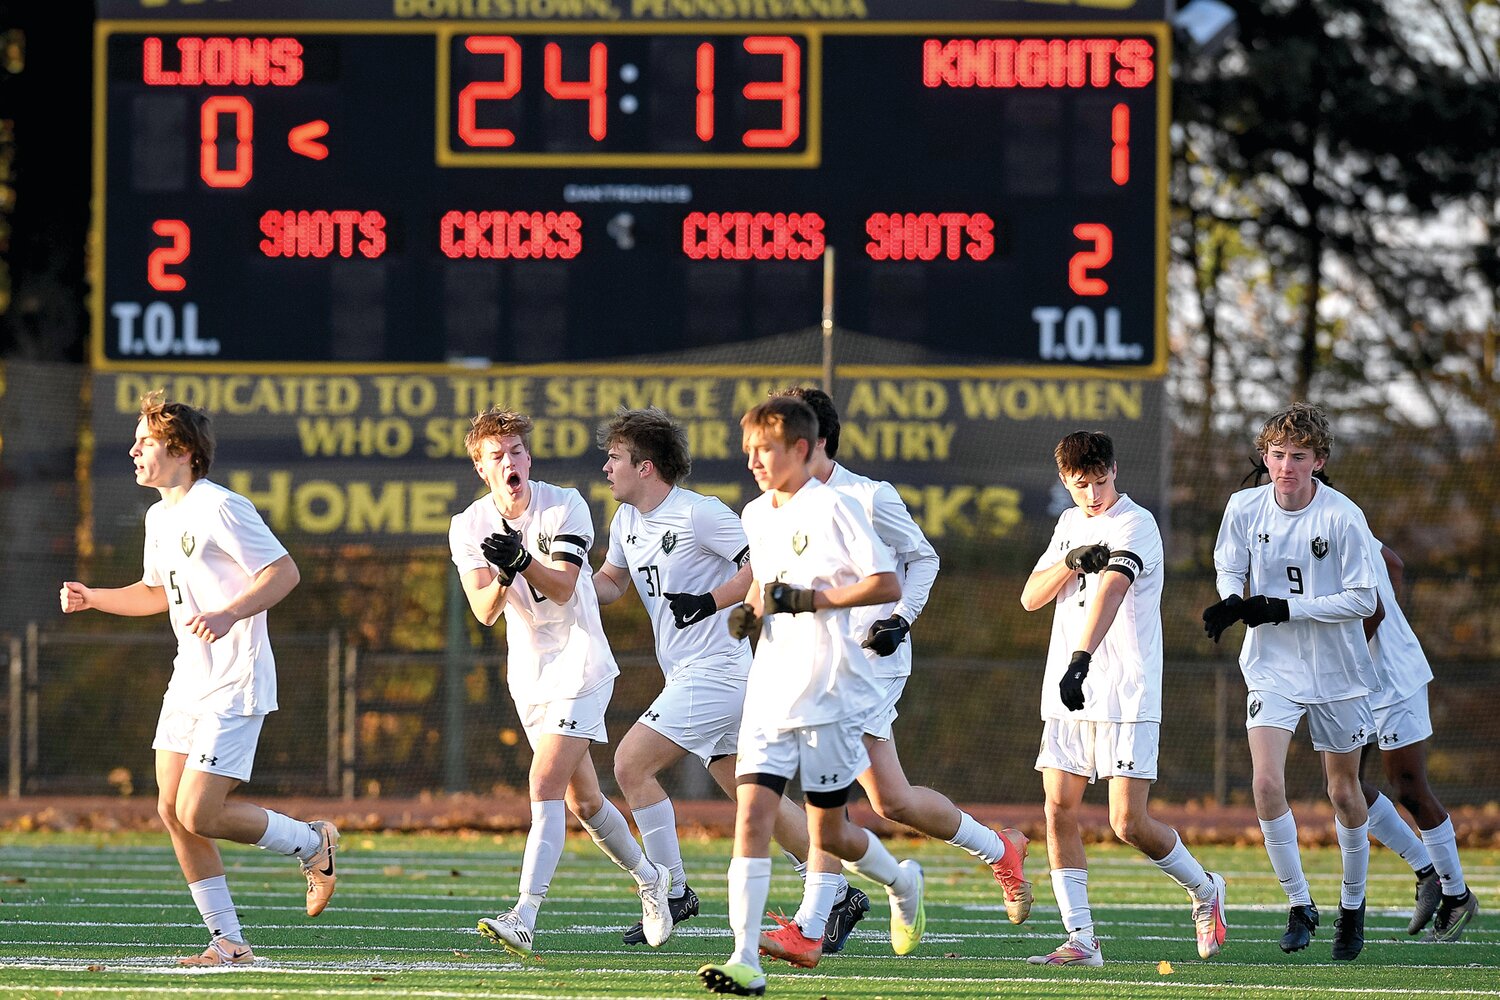 Delco Christian scored the first goal of the game at the 24:13 mark, which was the first goal allowed by Faith Christian in 12 games. The Lions had a total of 17 shutouts for the season.